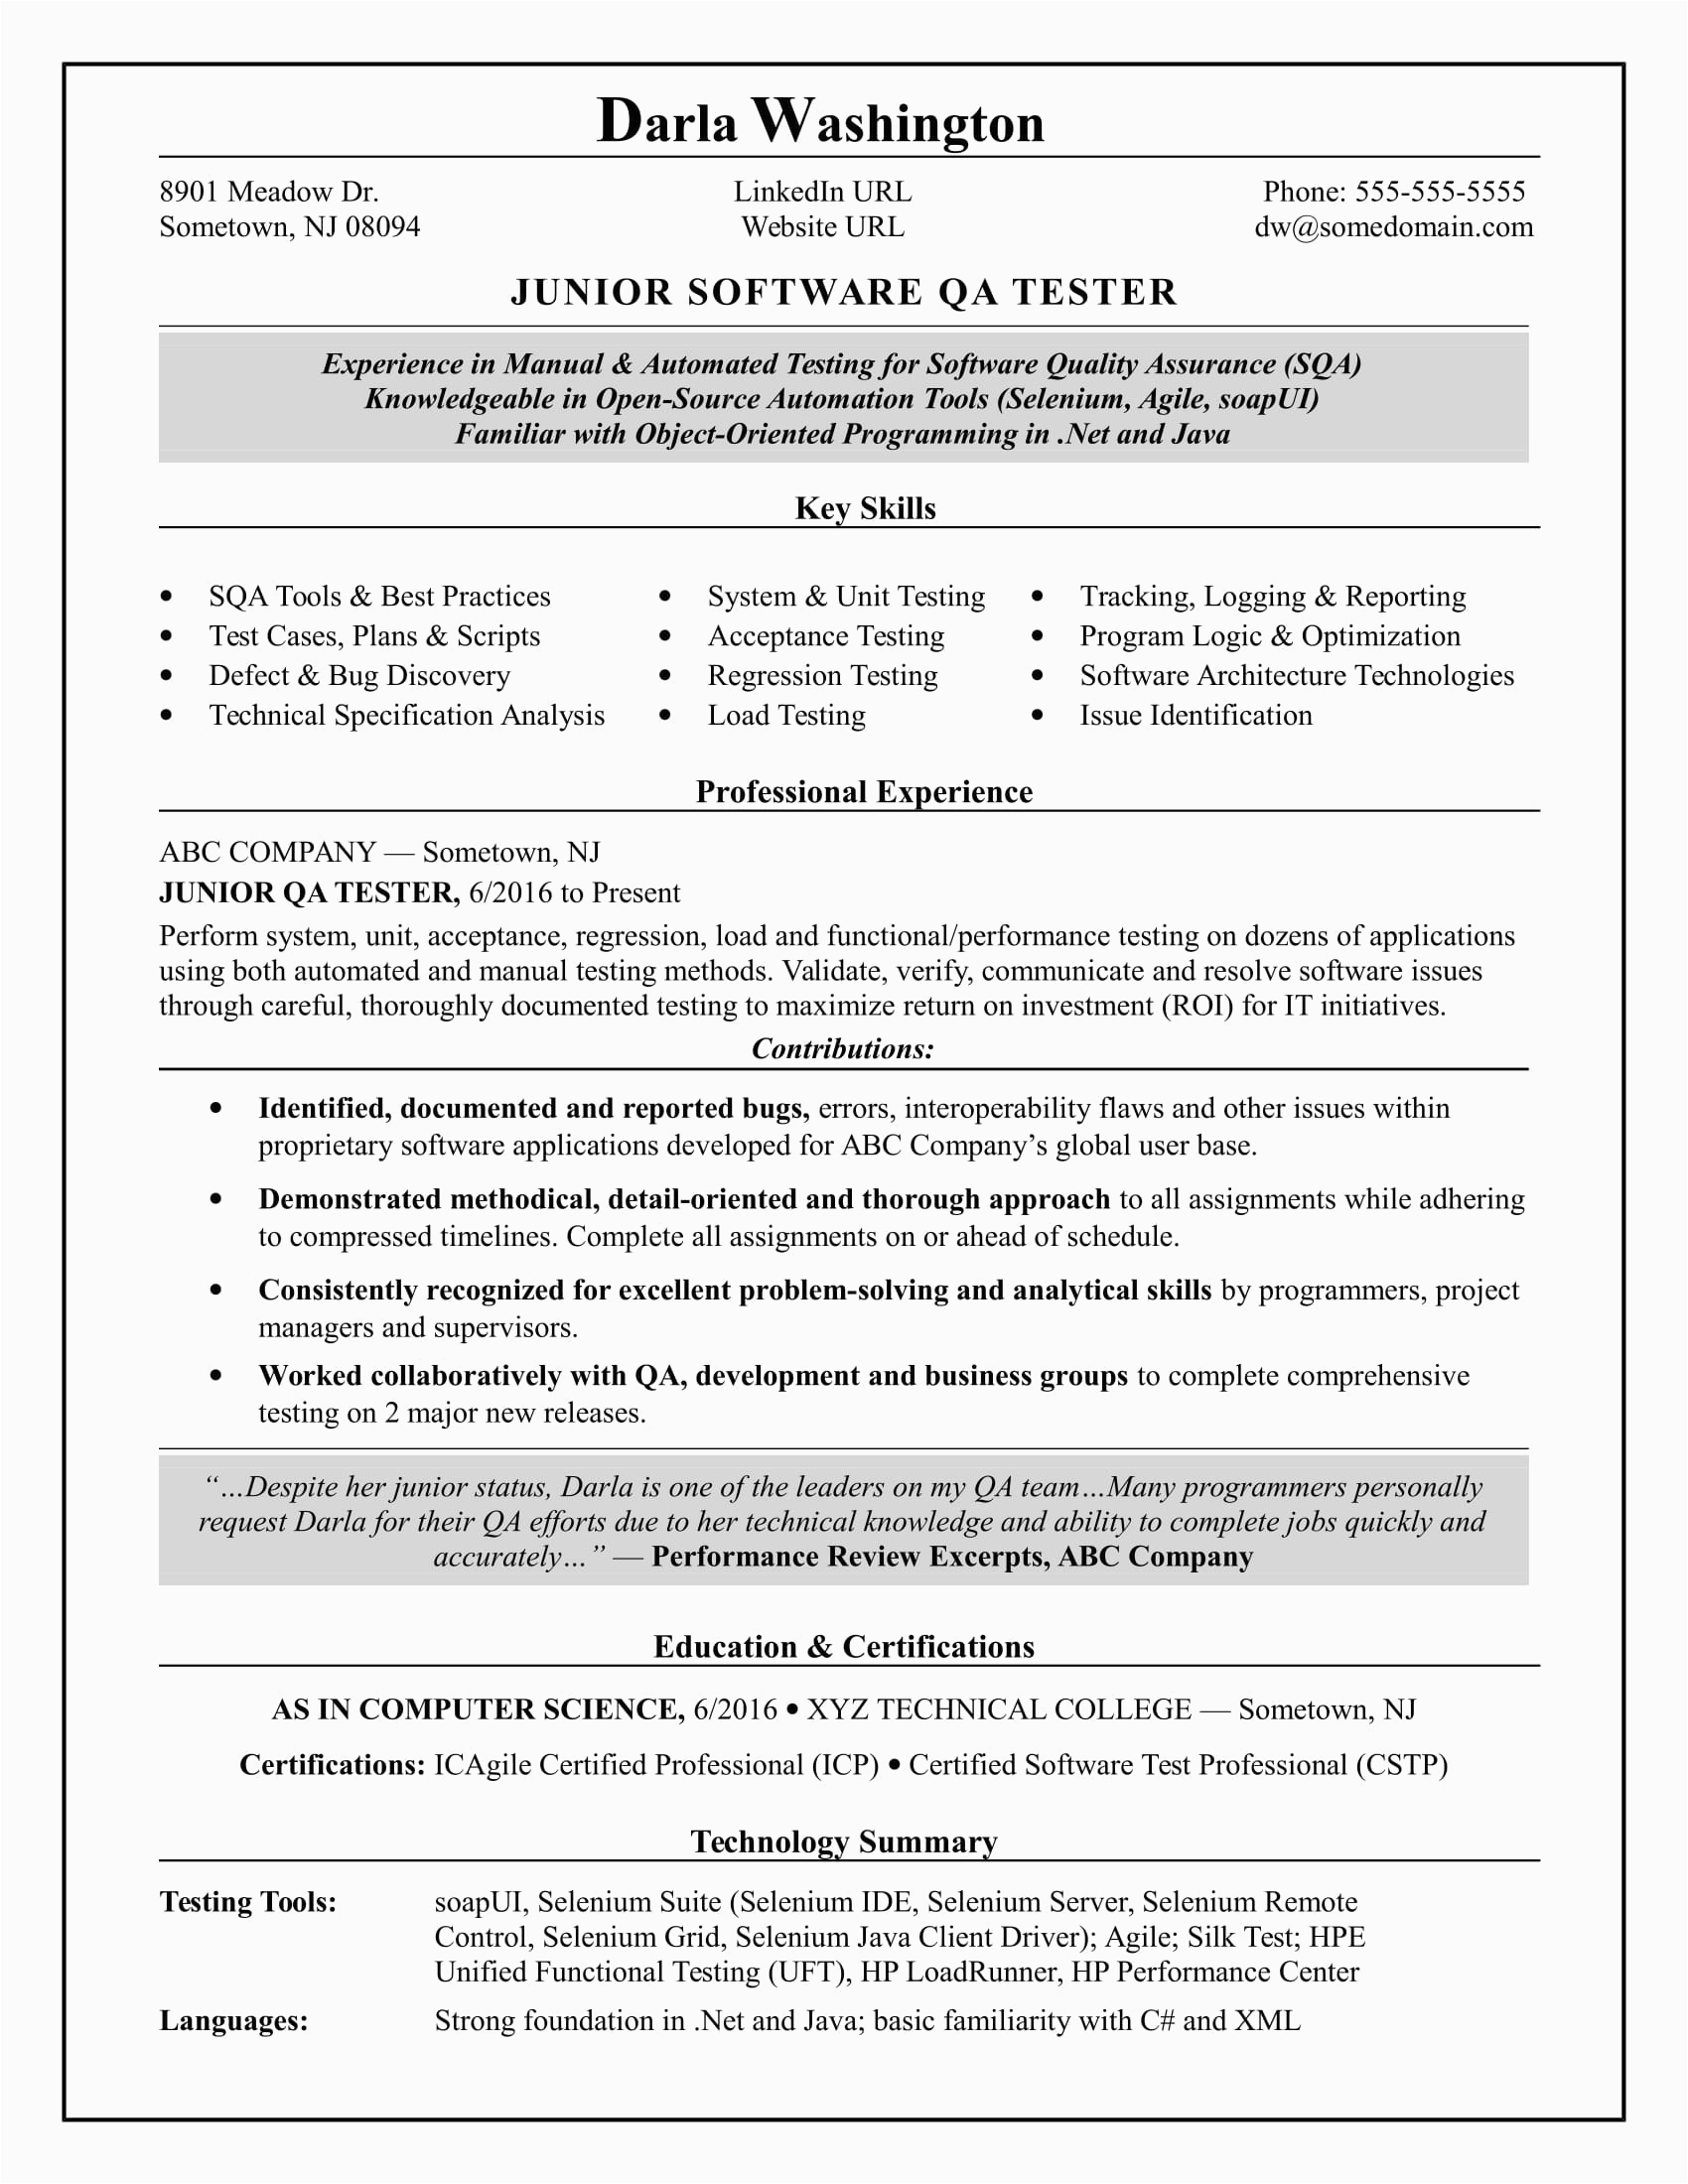 Sample Resumes for Experienced Candidates In Testing Entry Level Qa software Tester Resume Sample